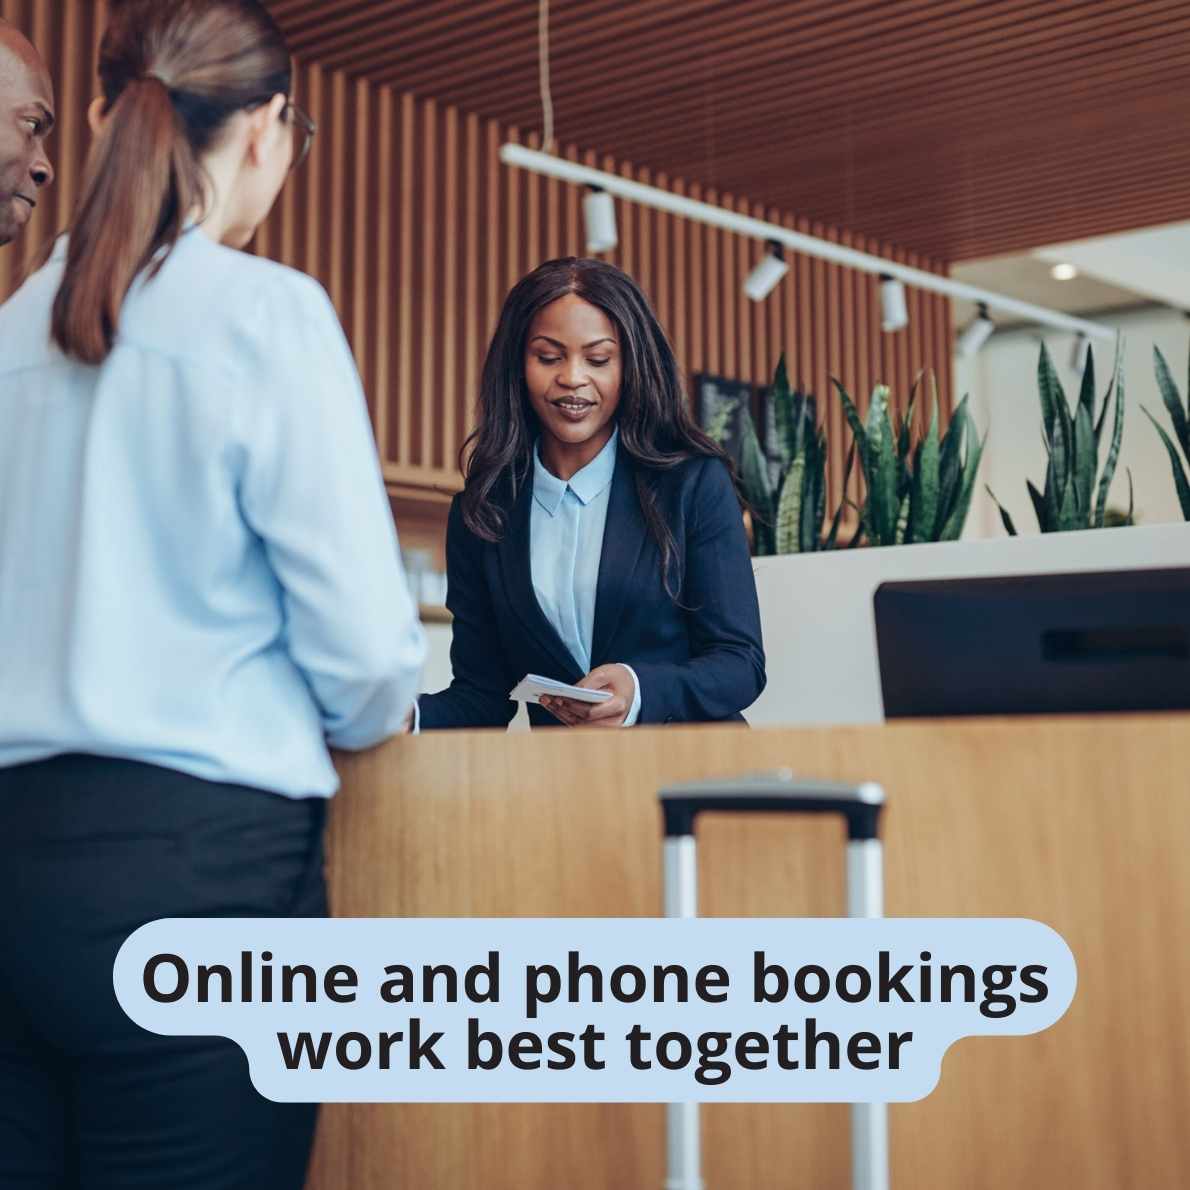 freetobook online and phone bookings work best together